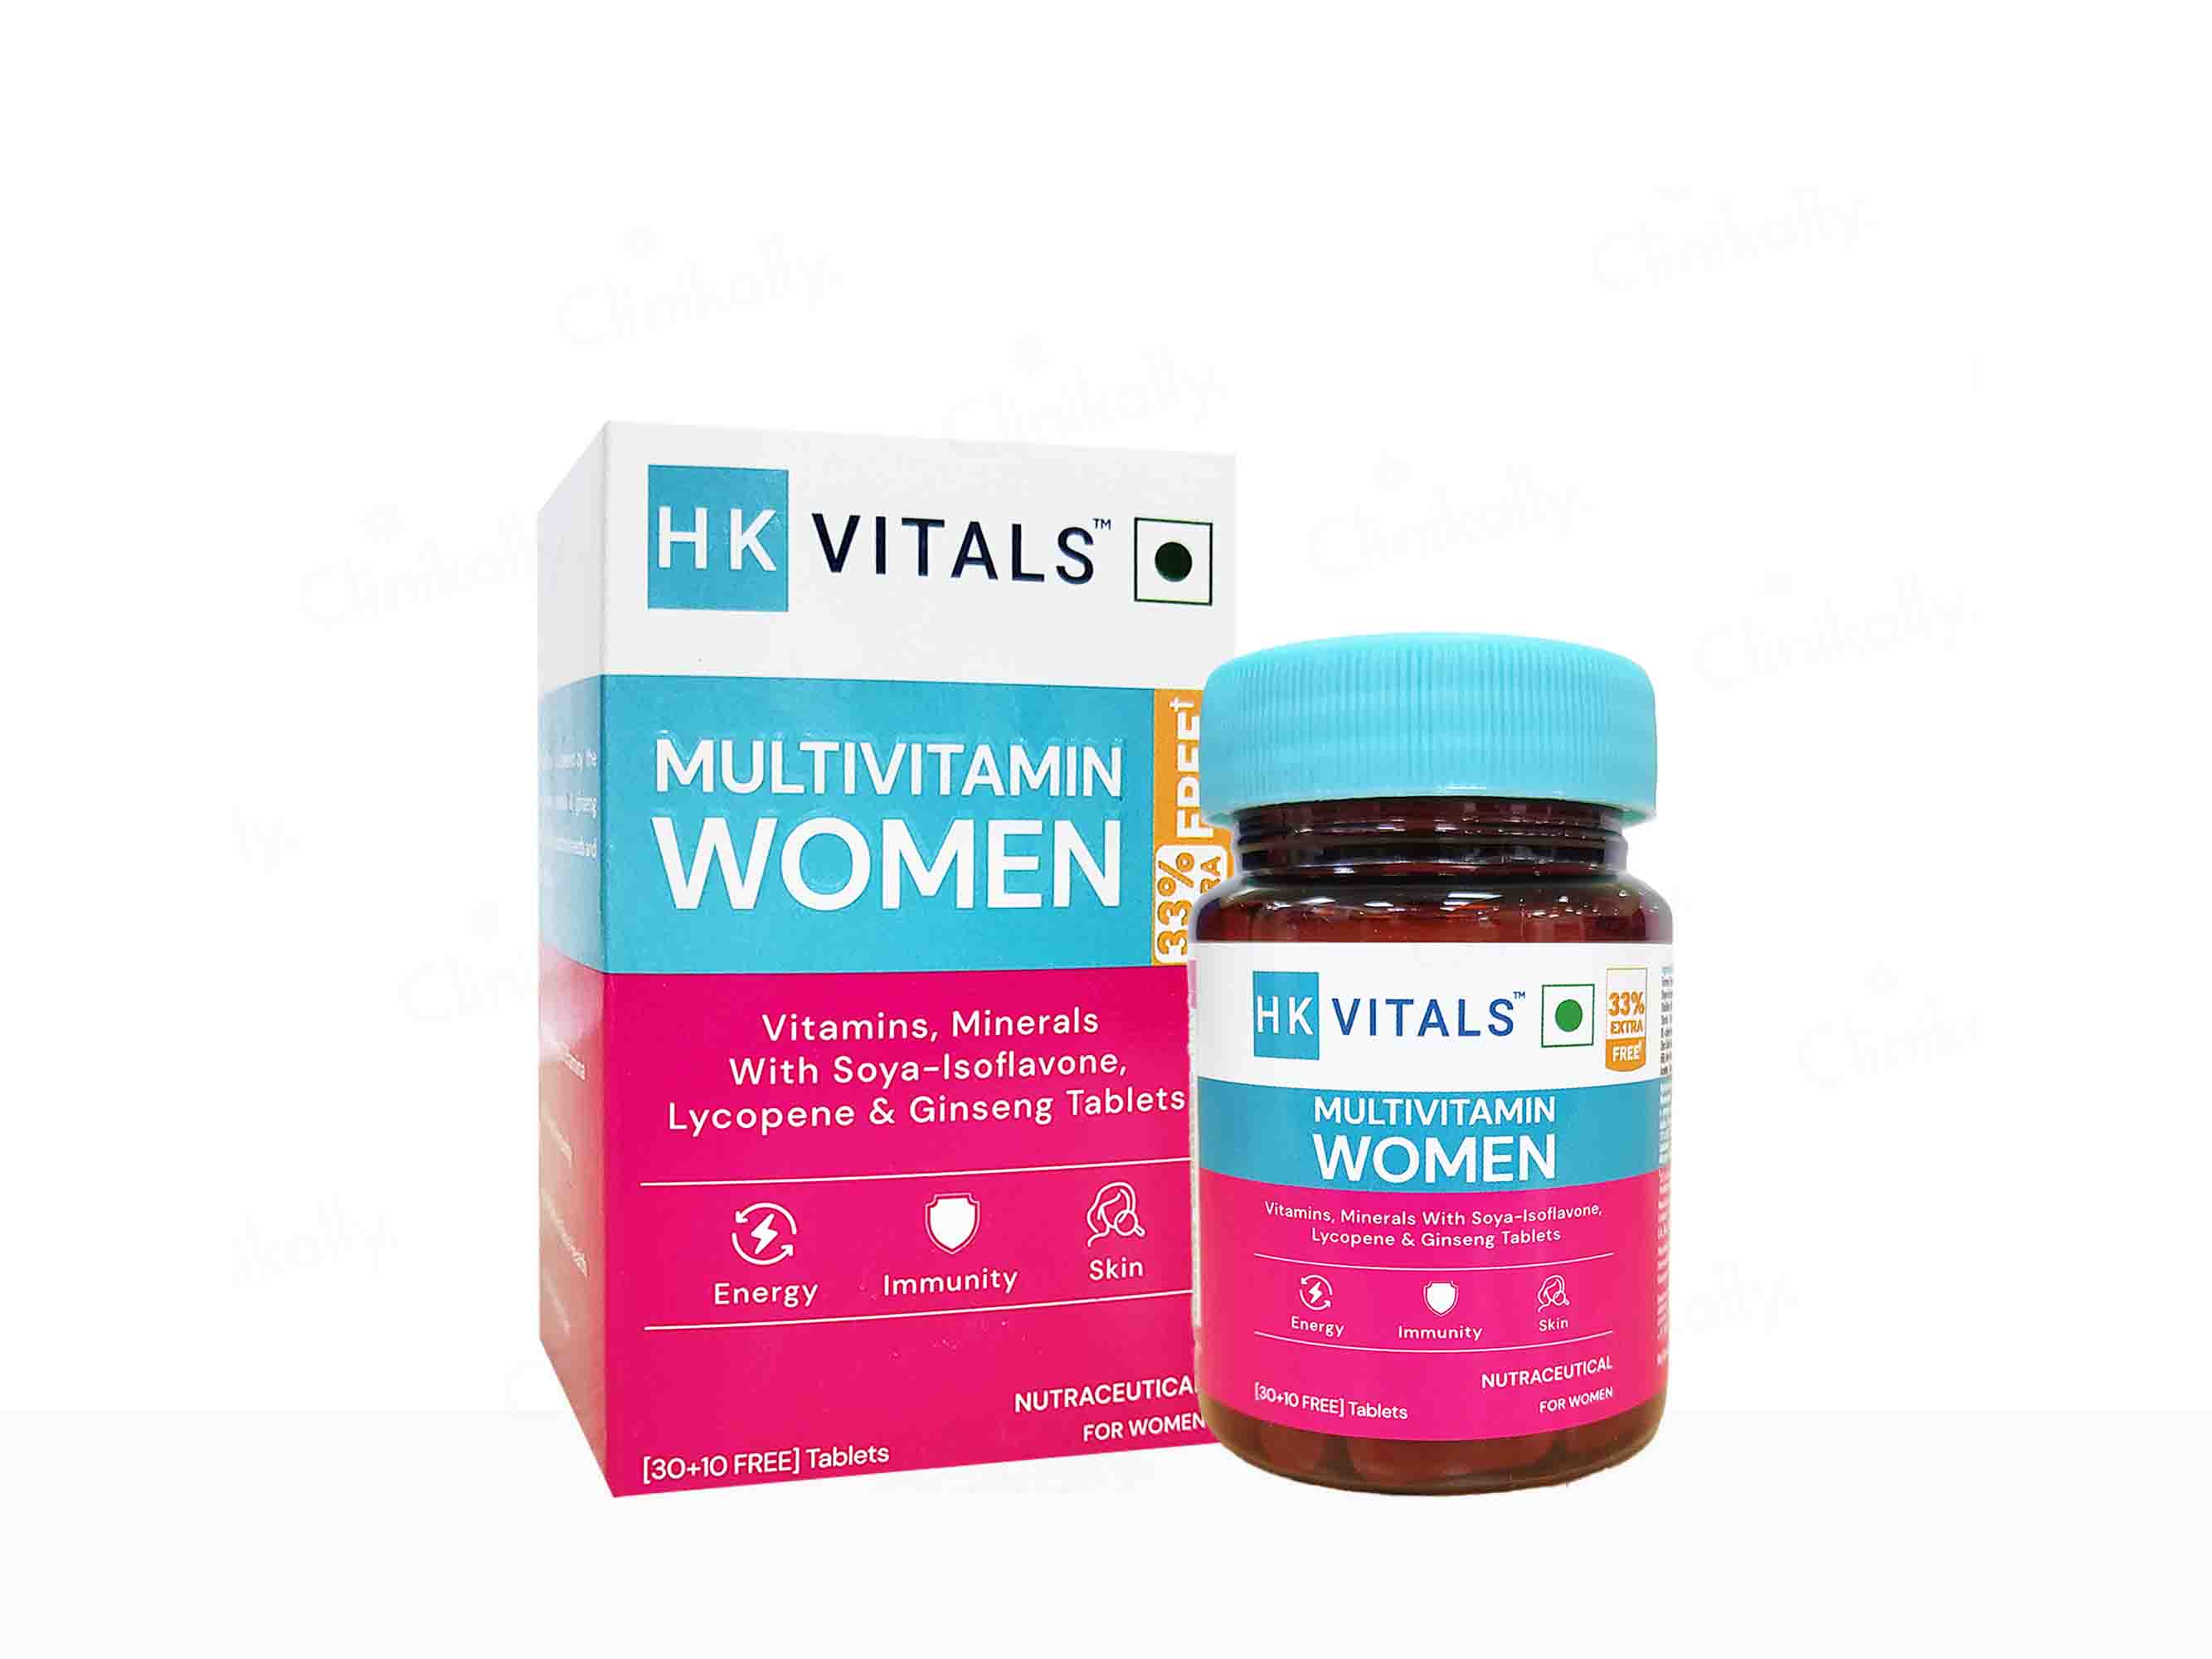 HK Vitals Multivitamin with Multimineral, Soya-Isoflavones, Lycopene & Ginseng Extract Tablet For Women